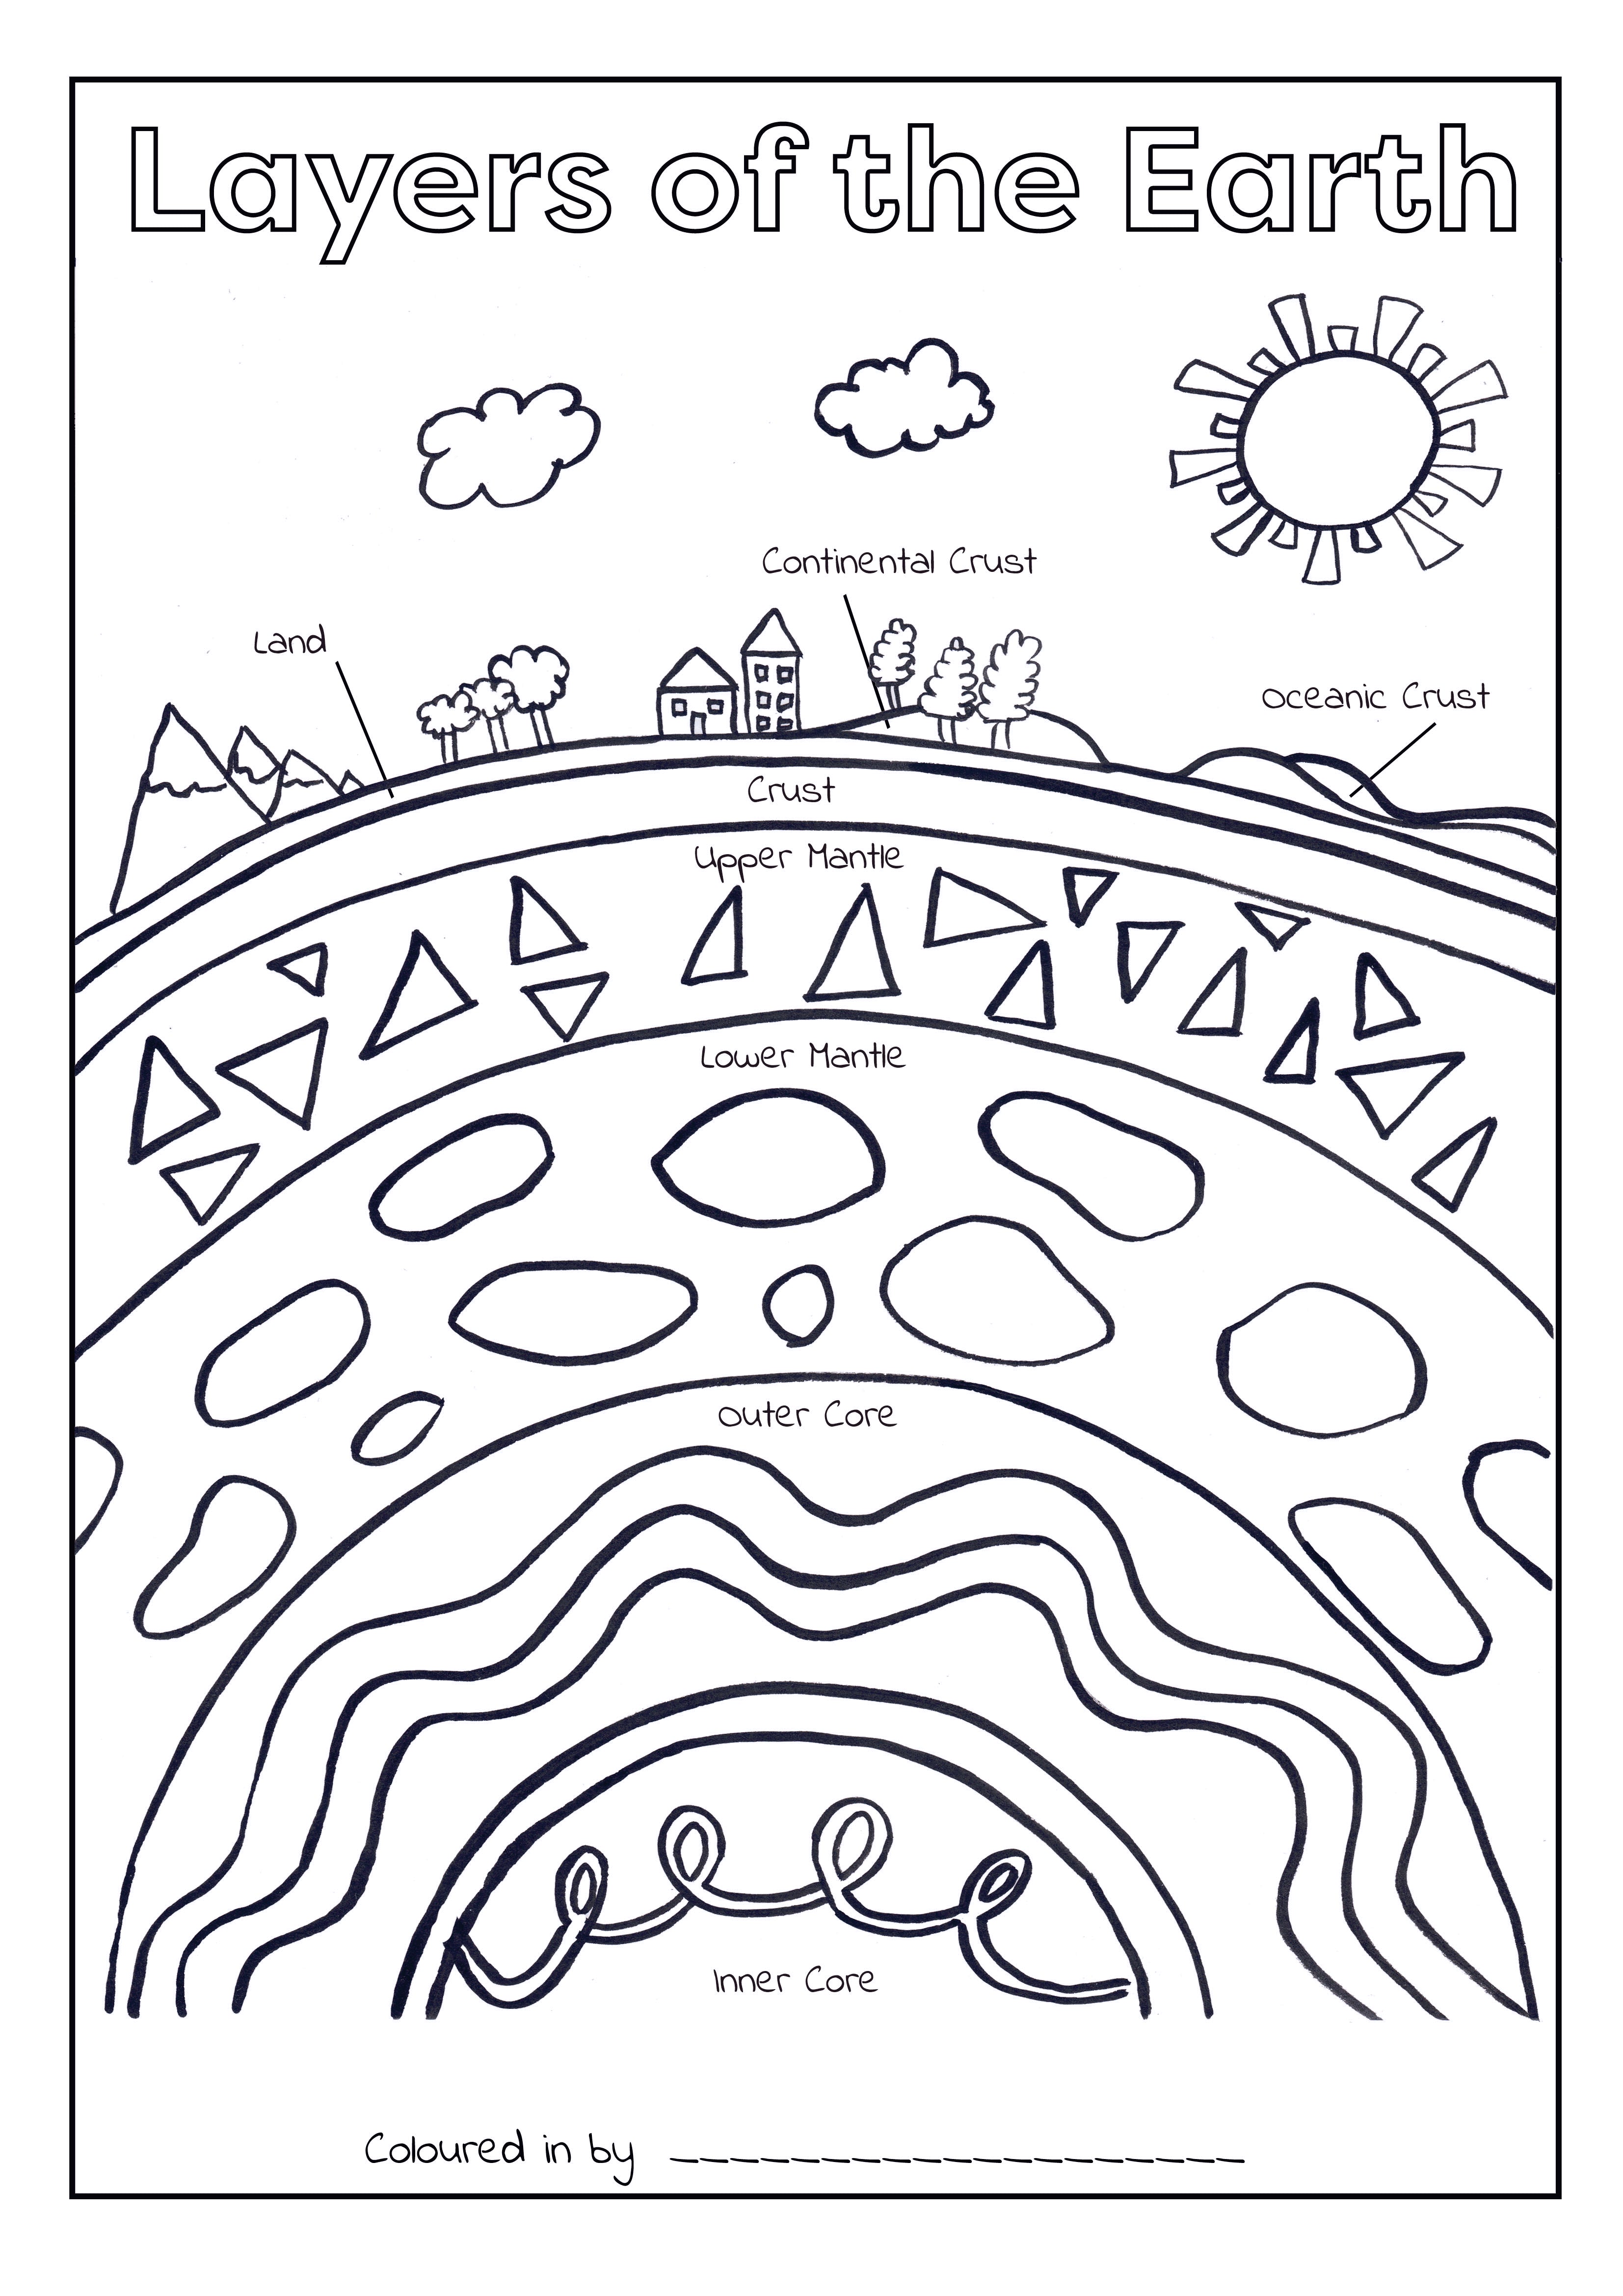 layers-of-the-earth-colouring-printable-squidgearoo